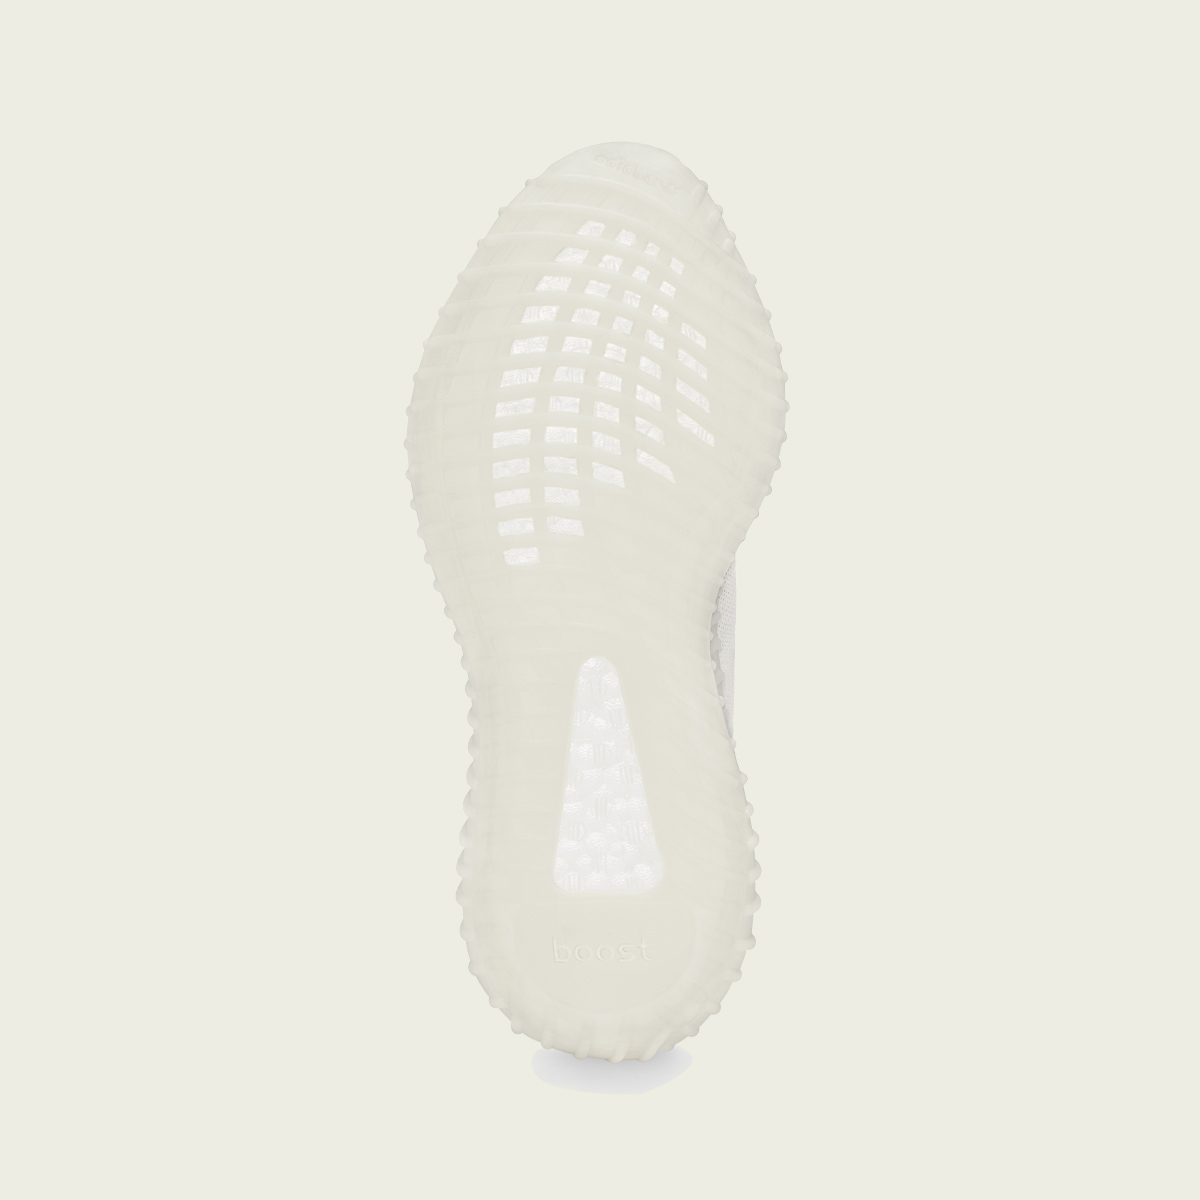 History of Adidas Yeezy Boost 350 Sneakers: What You Need to Know –  Footwear News